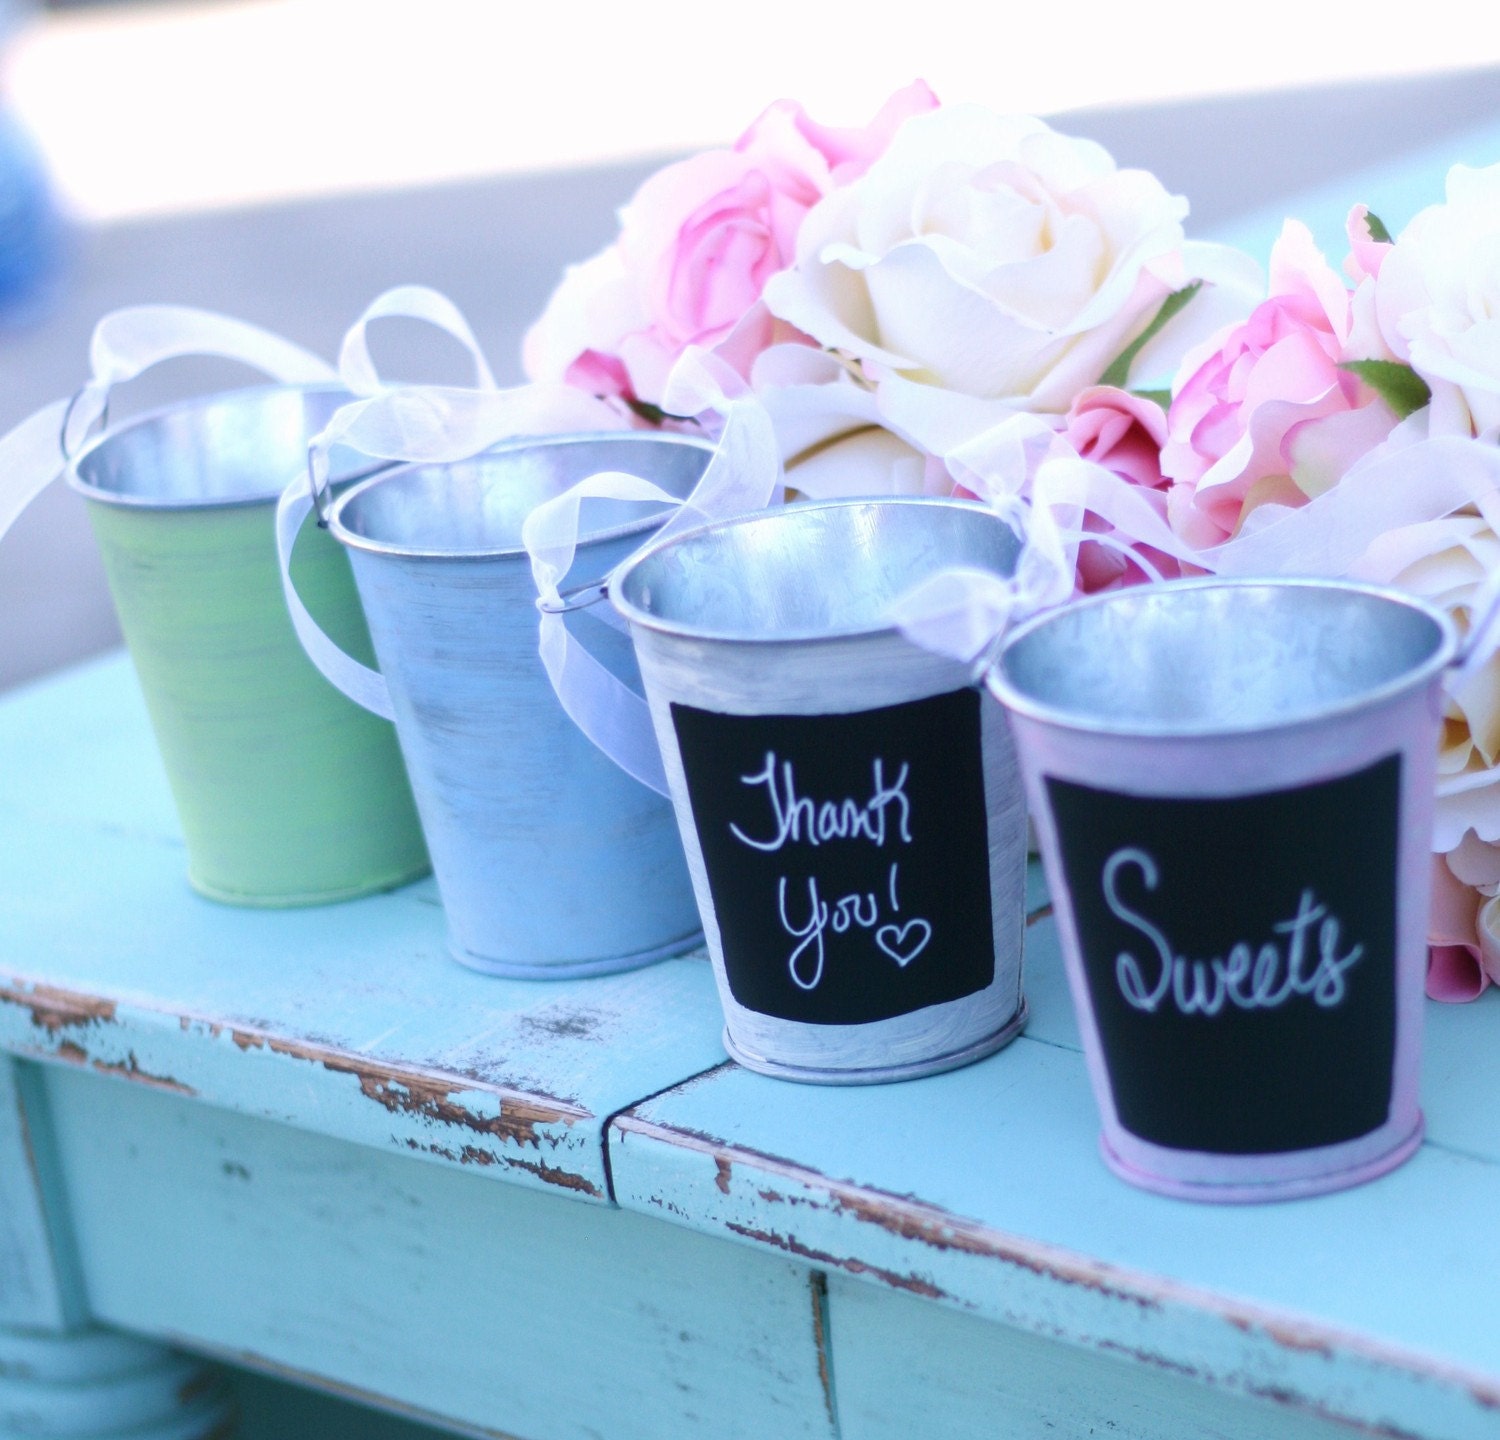 SET of 50 Spring Summer You Pick The Color Pink Blue Green Ivory Tins With Chalkboard Fronts Guest Favors Candy Bar Outdoor Vintage Circus Shabby Chic Wedding Decorations